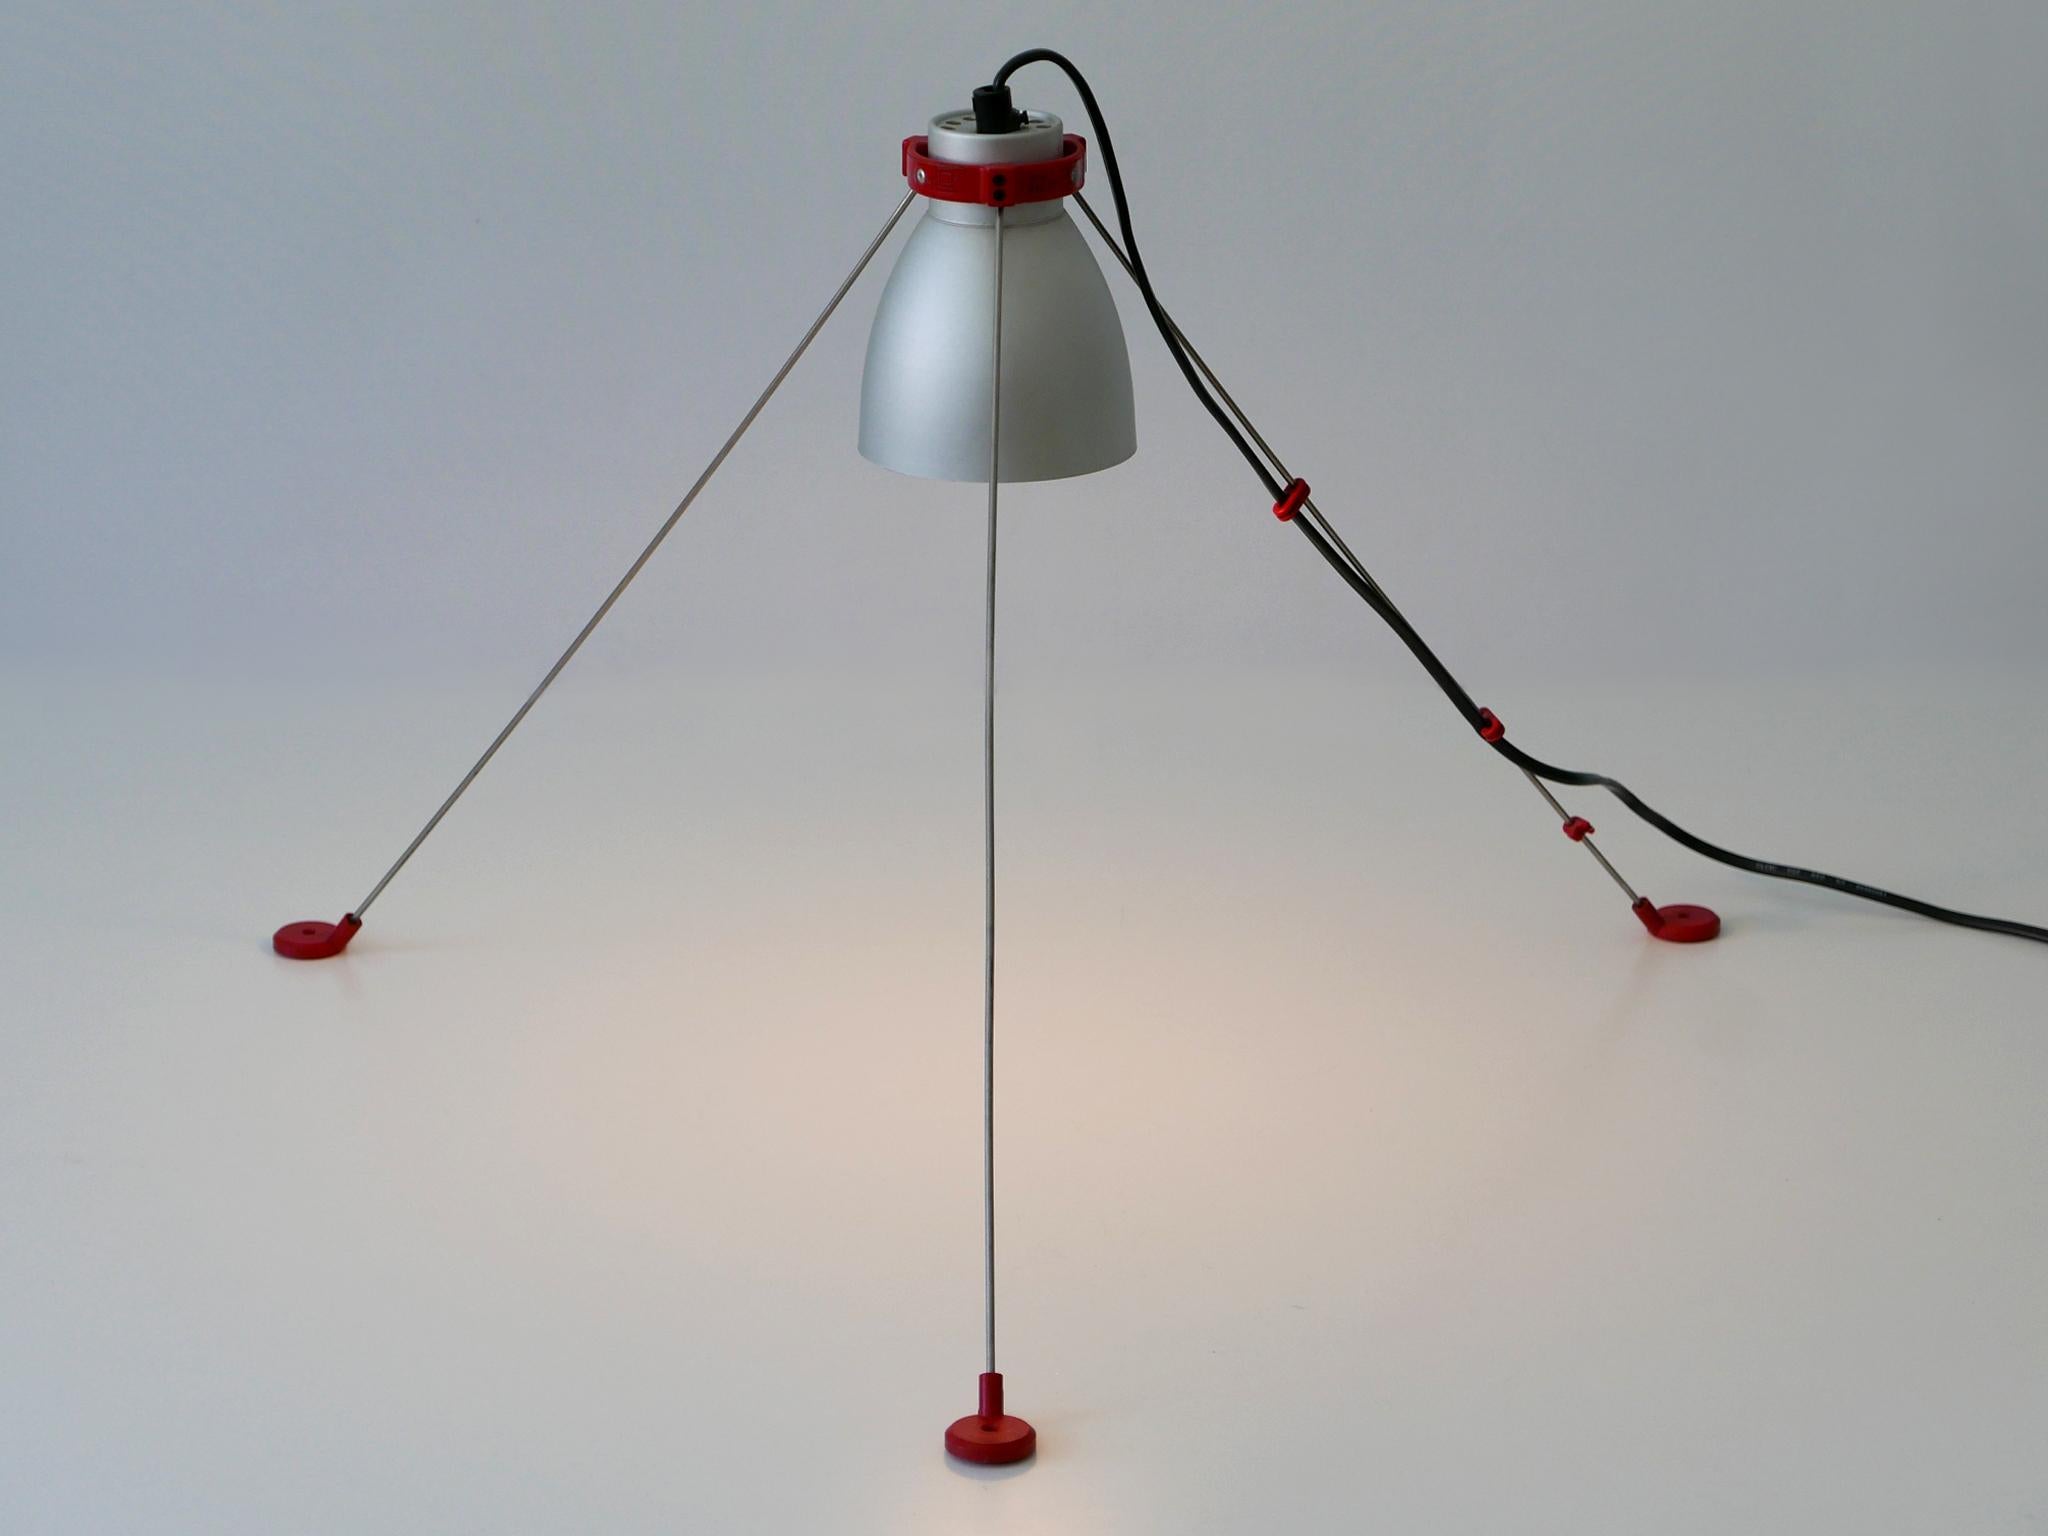 Extremely rare & multi-functional table / floor / wall or ceiling lamp 'Grifo'. Designed by G.H. Tew for Artemide, Italy, 1980s.

Executed in aluminium, metal and plastic, the table lamp comes with 1 x E27 / 26 Edison screw fit bulb holder, is